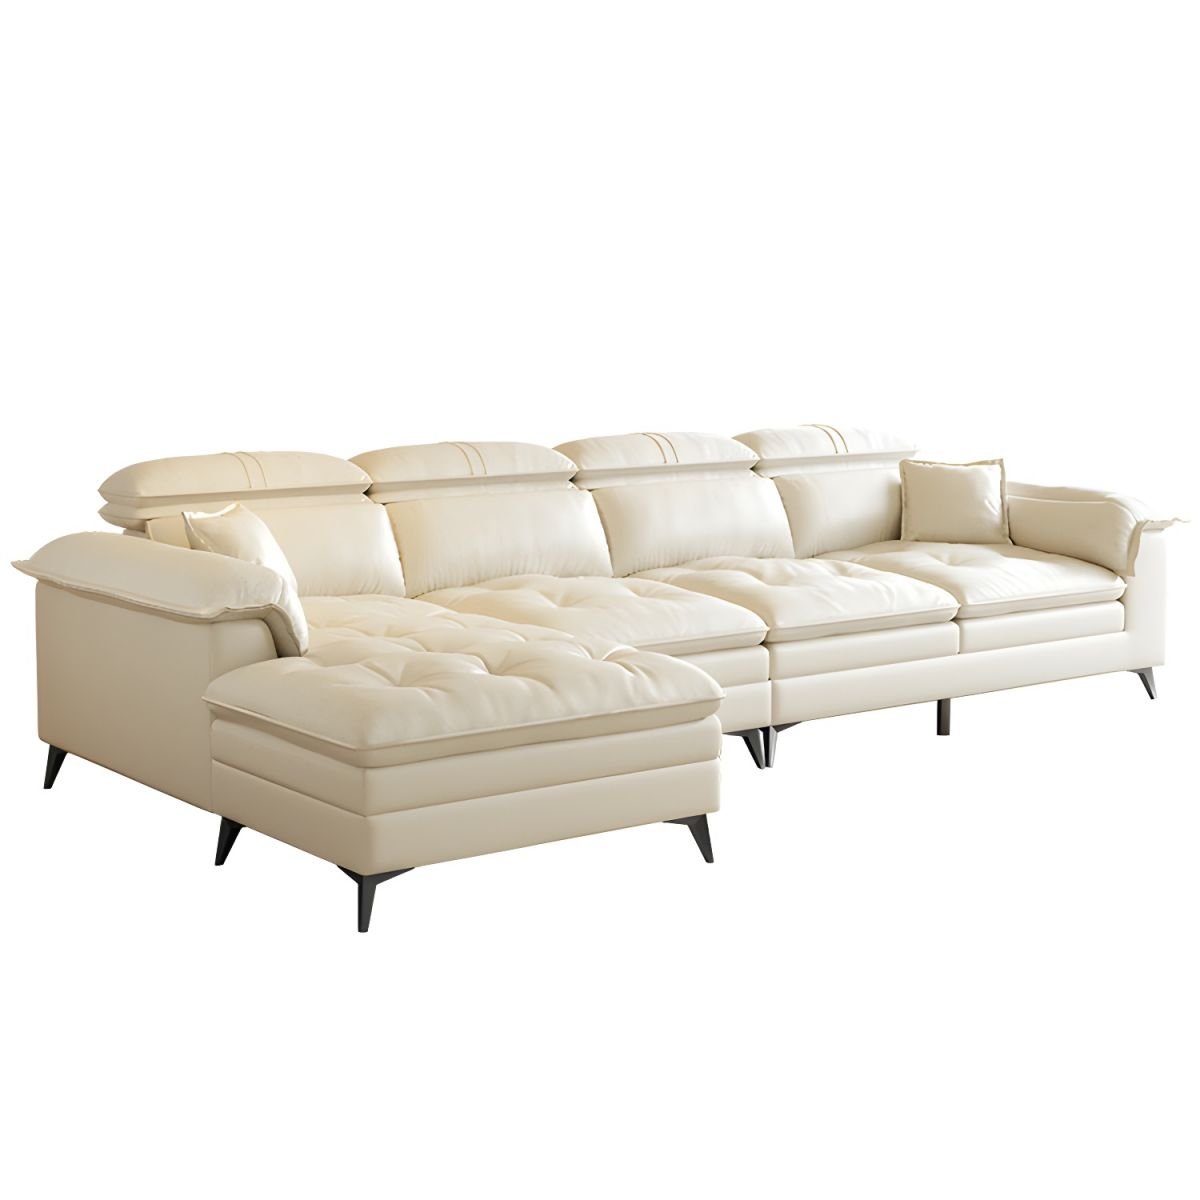 Faux Leather Modern Sectional Sofa in White with Pillow Top Arm - Tech Cloth 140"L x 70"W x 29"H